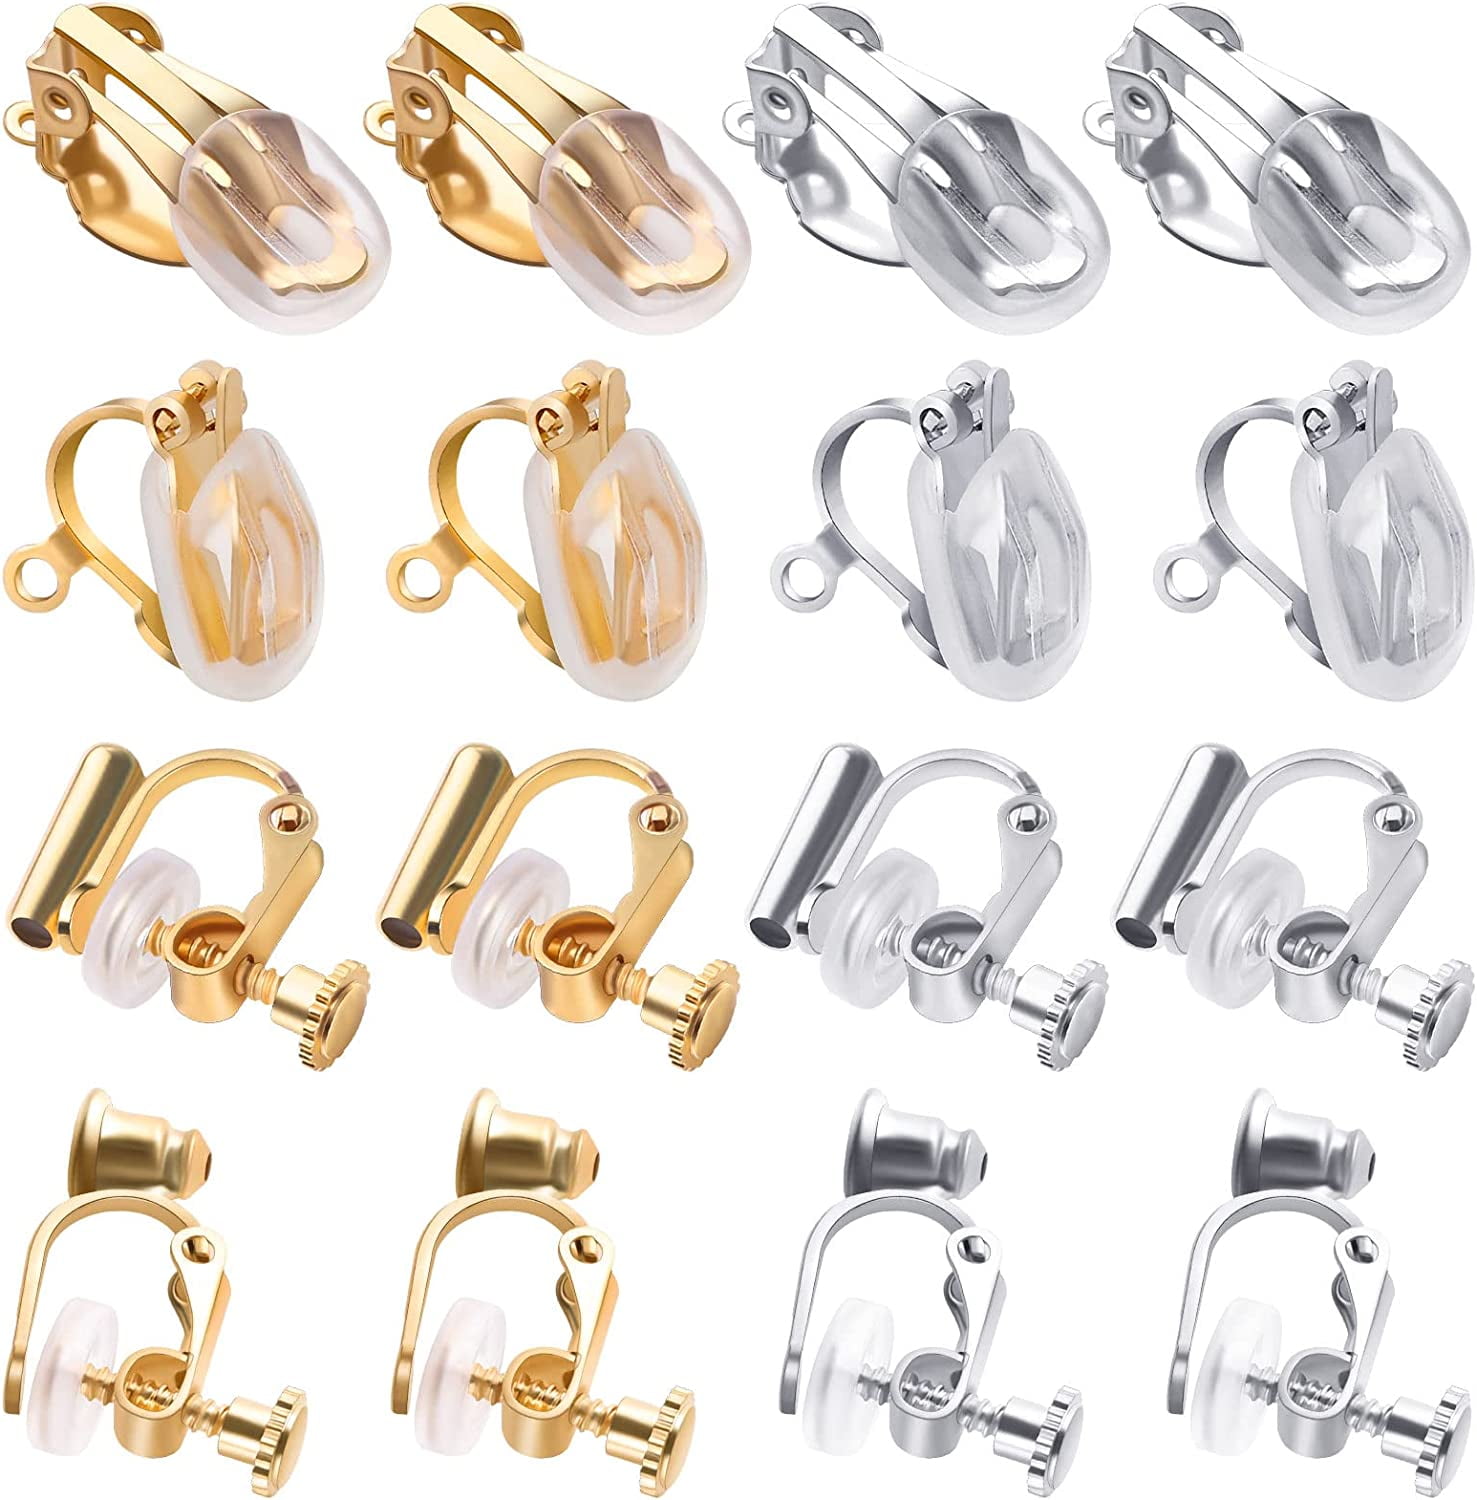 20pcs Clip on Earring Backs for Jewelry Making, Hypoallergenic Earring Converter Pierced to Clip with Easy Open Loop for DIY Earring and Non Pierced